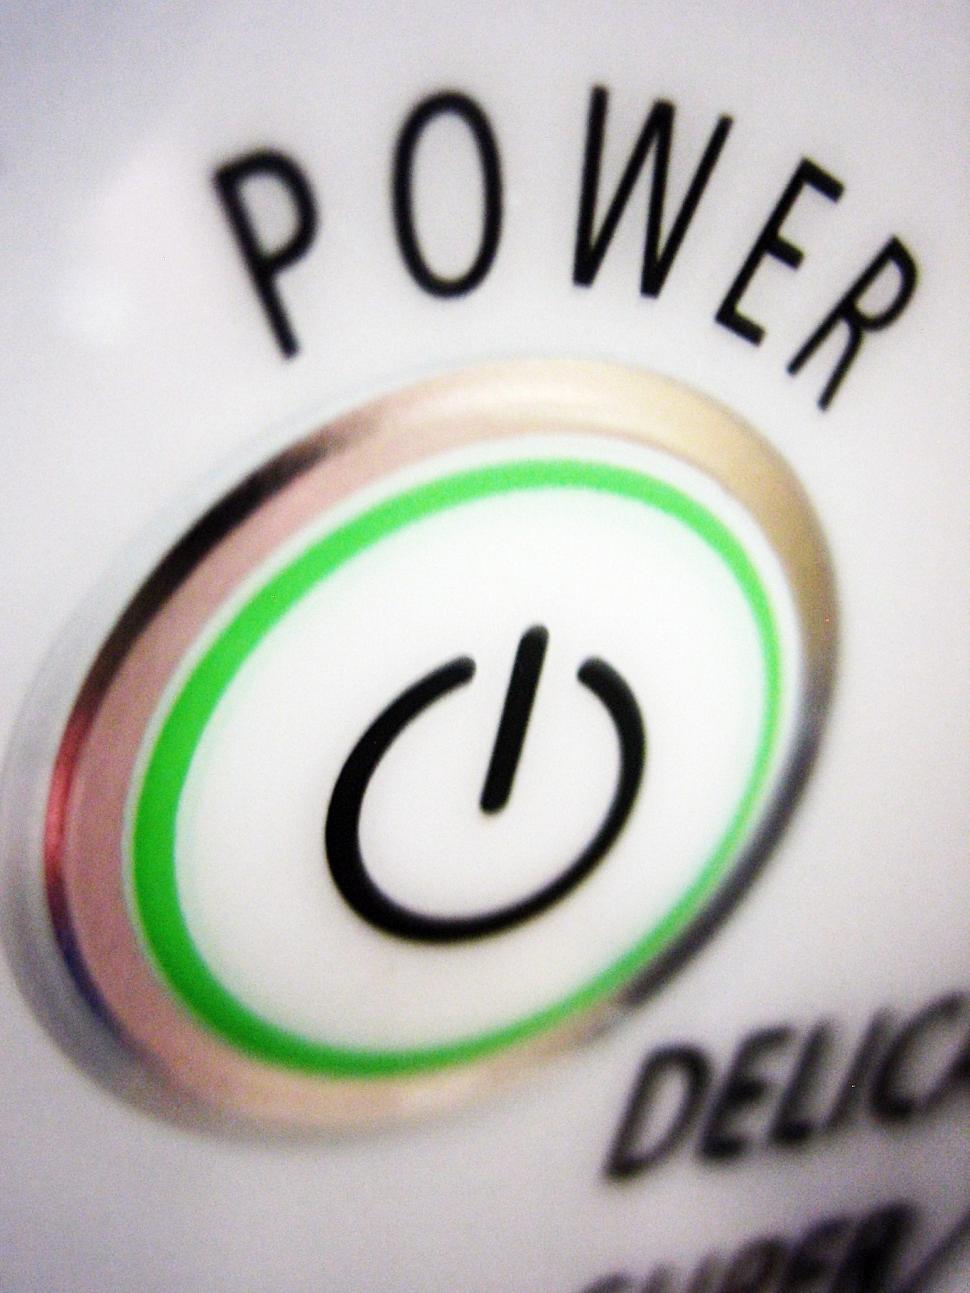 Free Image of Power Button on Washer 